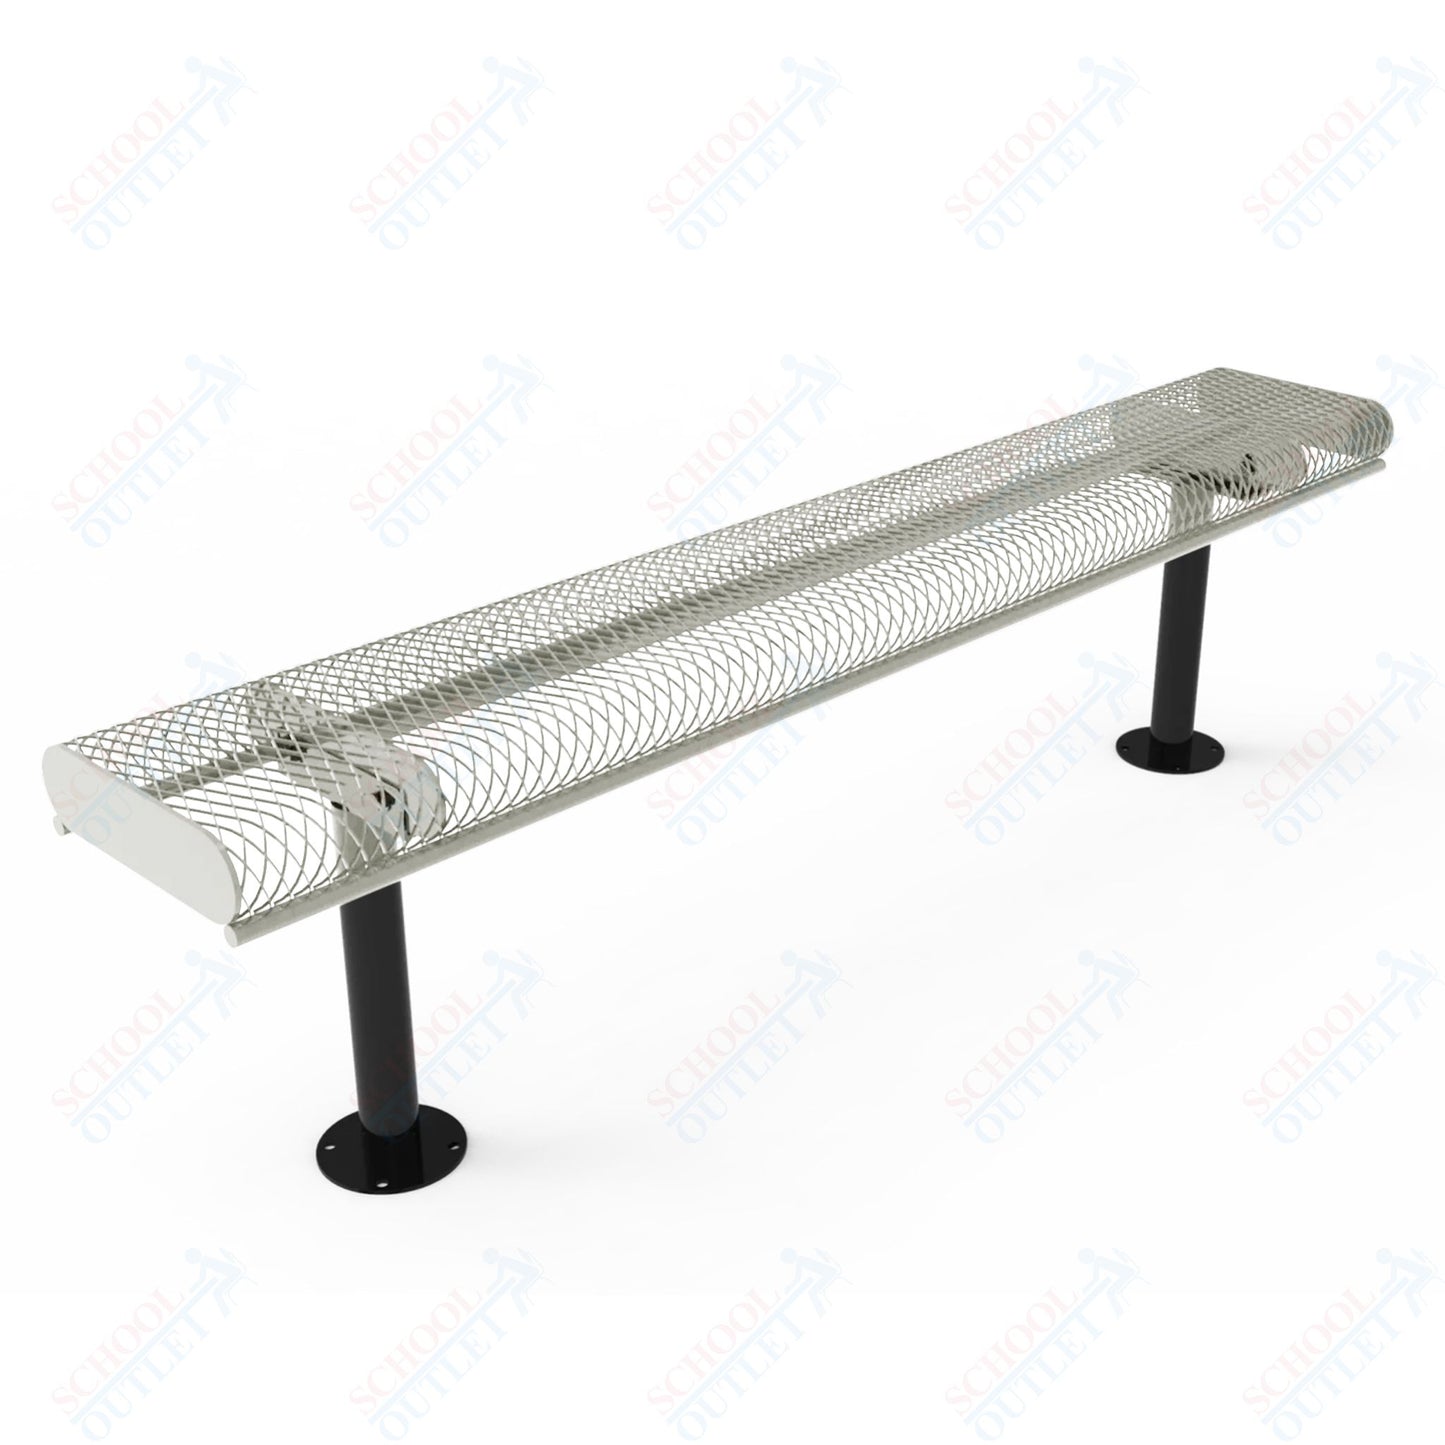 MyTcoat - Rolled Edges Outdoor Bench without Back 4' L - Surface Mount (MYT-BRE04-23)